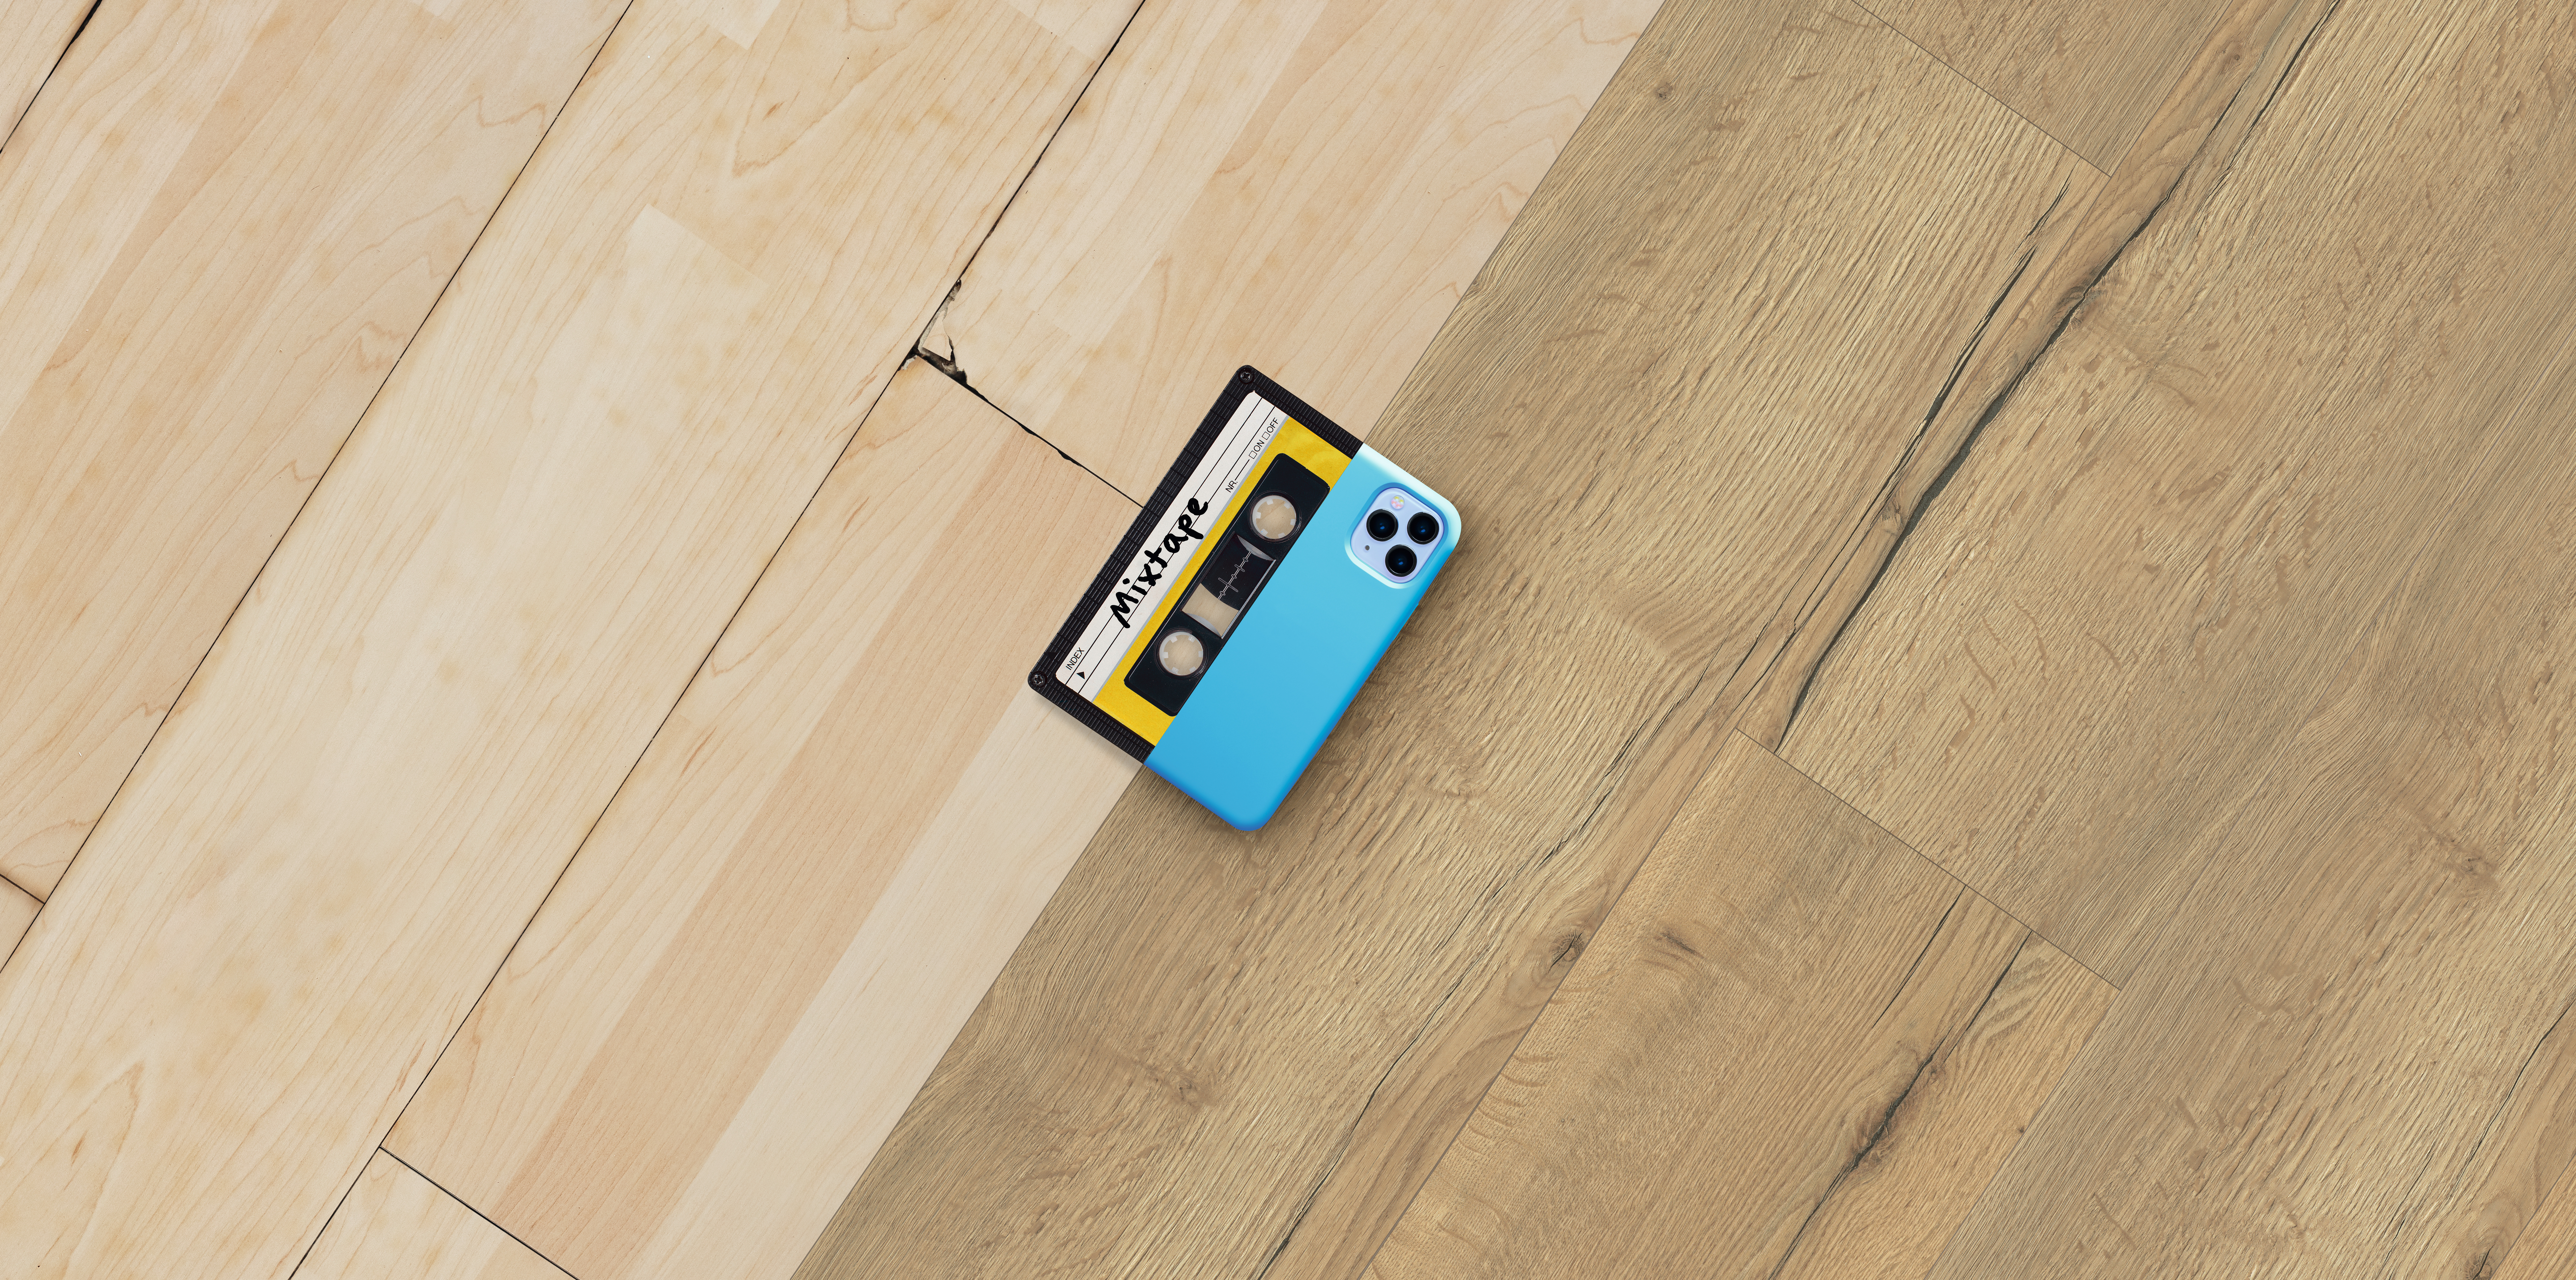 The former Laminate Flooring, with a cassette, vs. today’s laminate, with smartphone